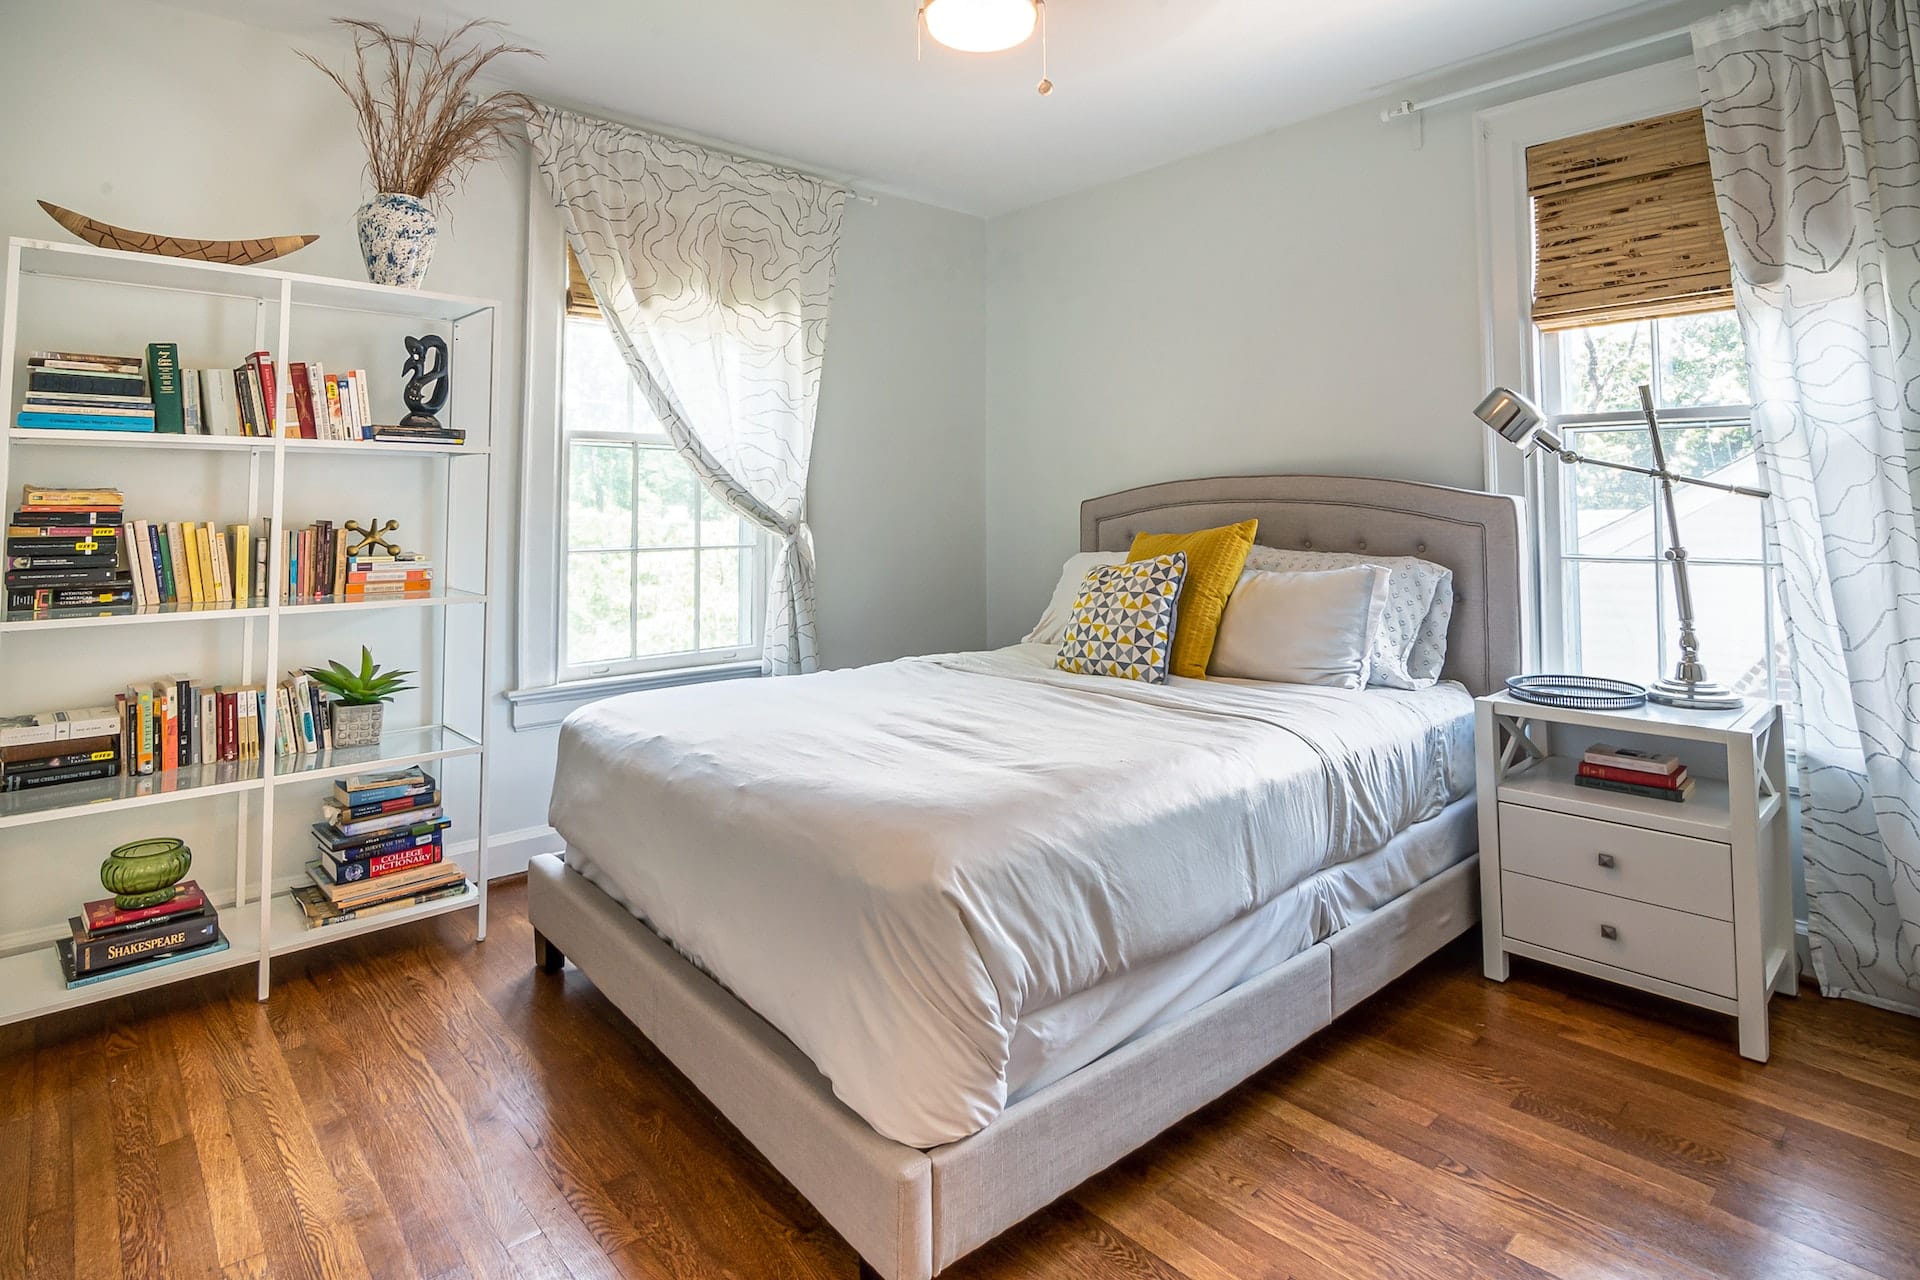 How to Organize a Small Bedroom